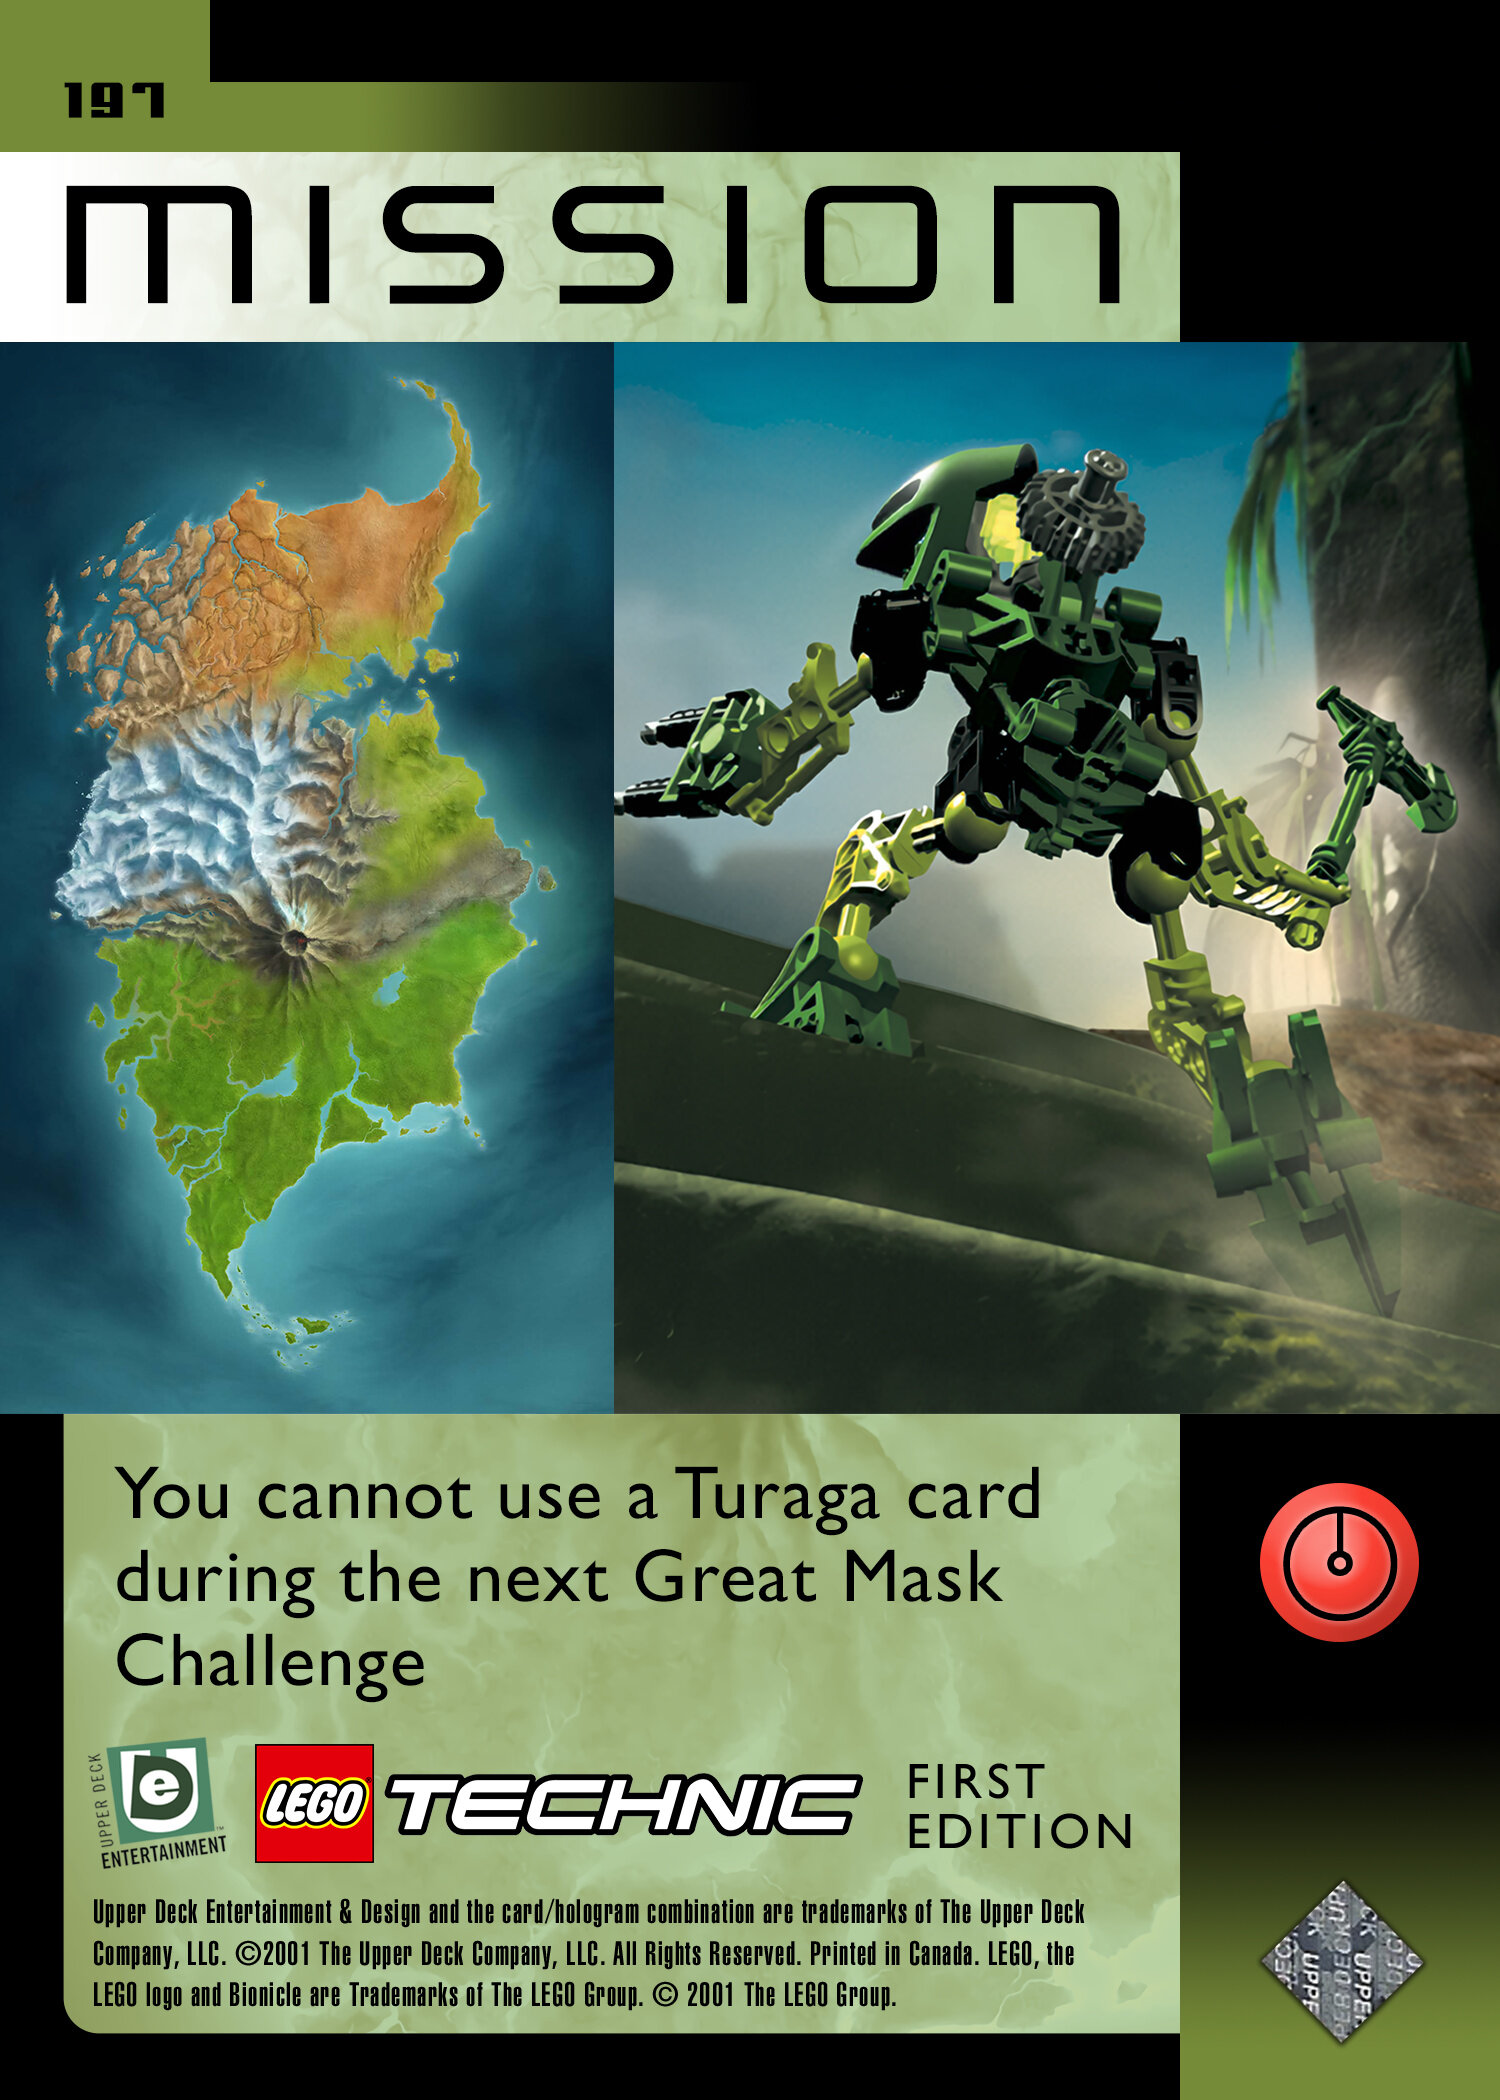 The Bionicle Tcg Topic A Bionicle Quest For The Masks Trading Card Game Discussion And Deck Tech Topic Bionicle The Ttv Message Boards - trading roblox card